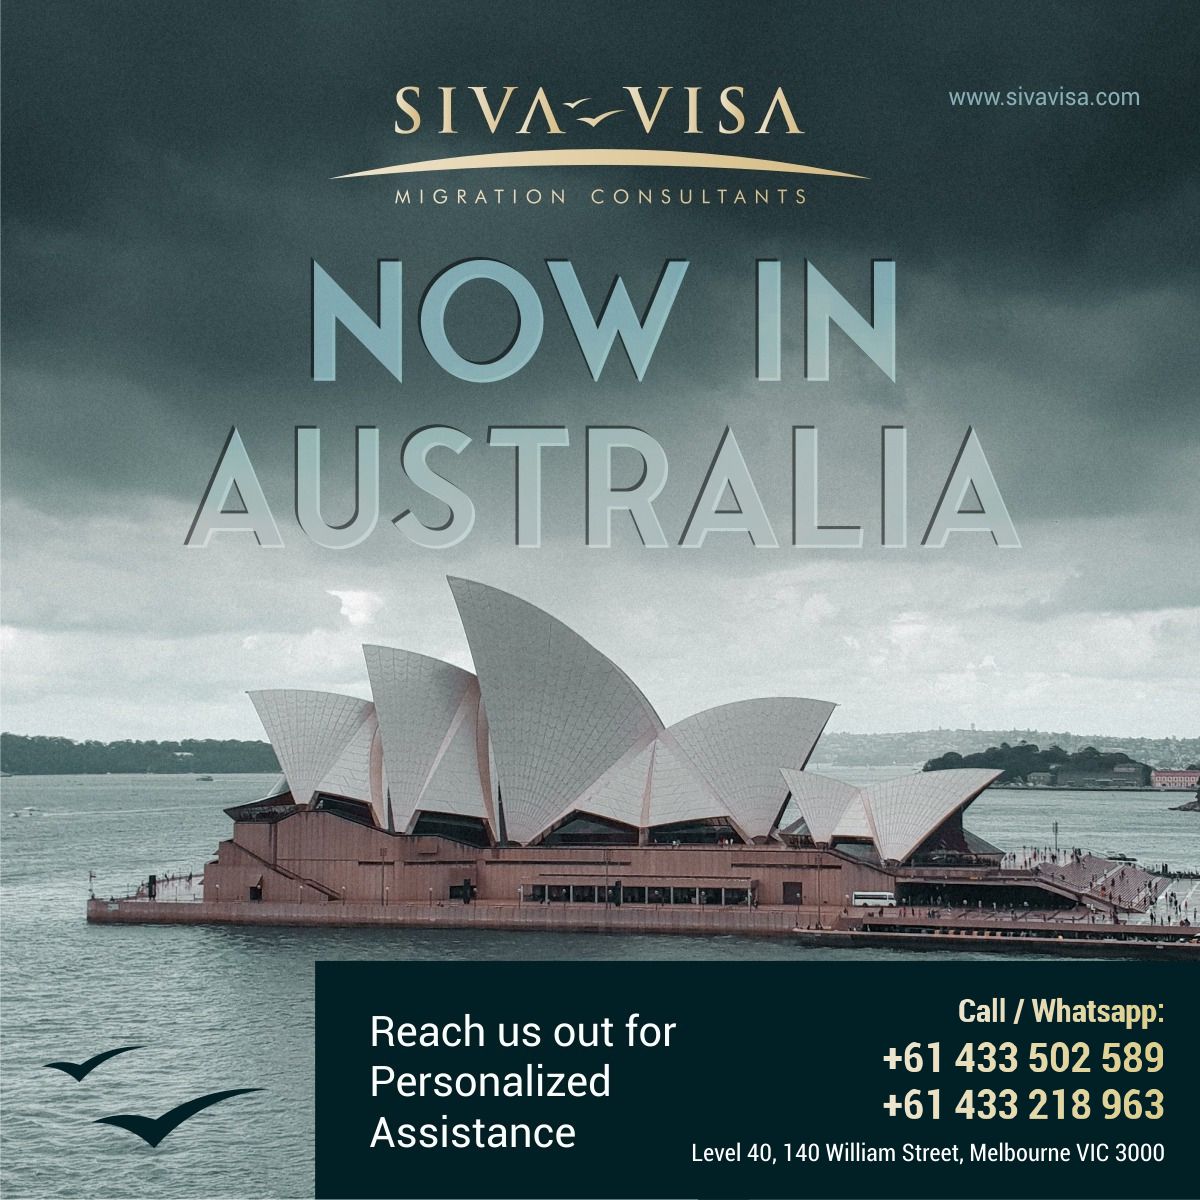 Exciting news! 🎉 Siva Visa is thrilled to announce its presence in Victoria, Australia! 🇦🇺 For expert migration assistance and personalized support

Call / Whatsapp: +61 433 502 589 or +61 433 218 963

#SivaVisa #NowInAustralia #AustralianIndians #MigrationAssistance #Australia